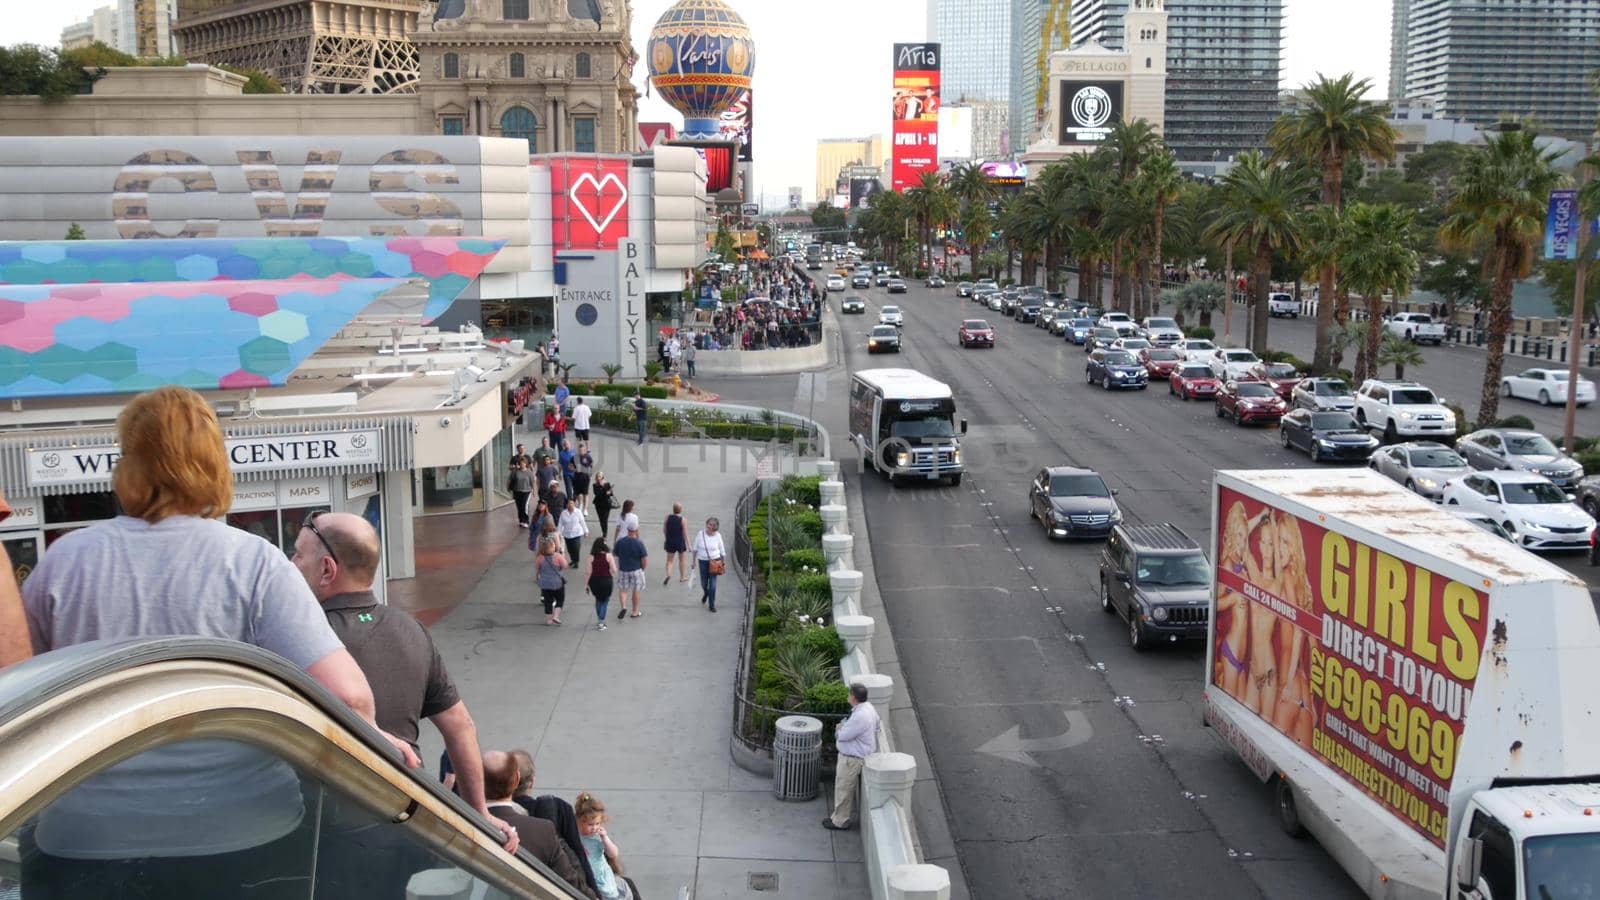 LAS VEGAS, NEVADA USA - 5 MAR 2020: The Strip boulevard with luxury casino and hotels in gambling sin city. Car traffic on road to Fremont street in tourist money playing resort. People walking by DogoraSun